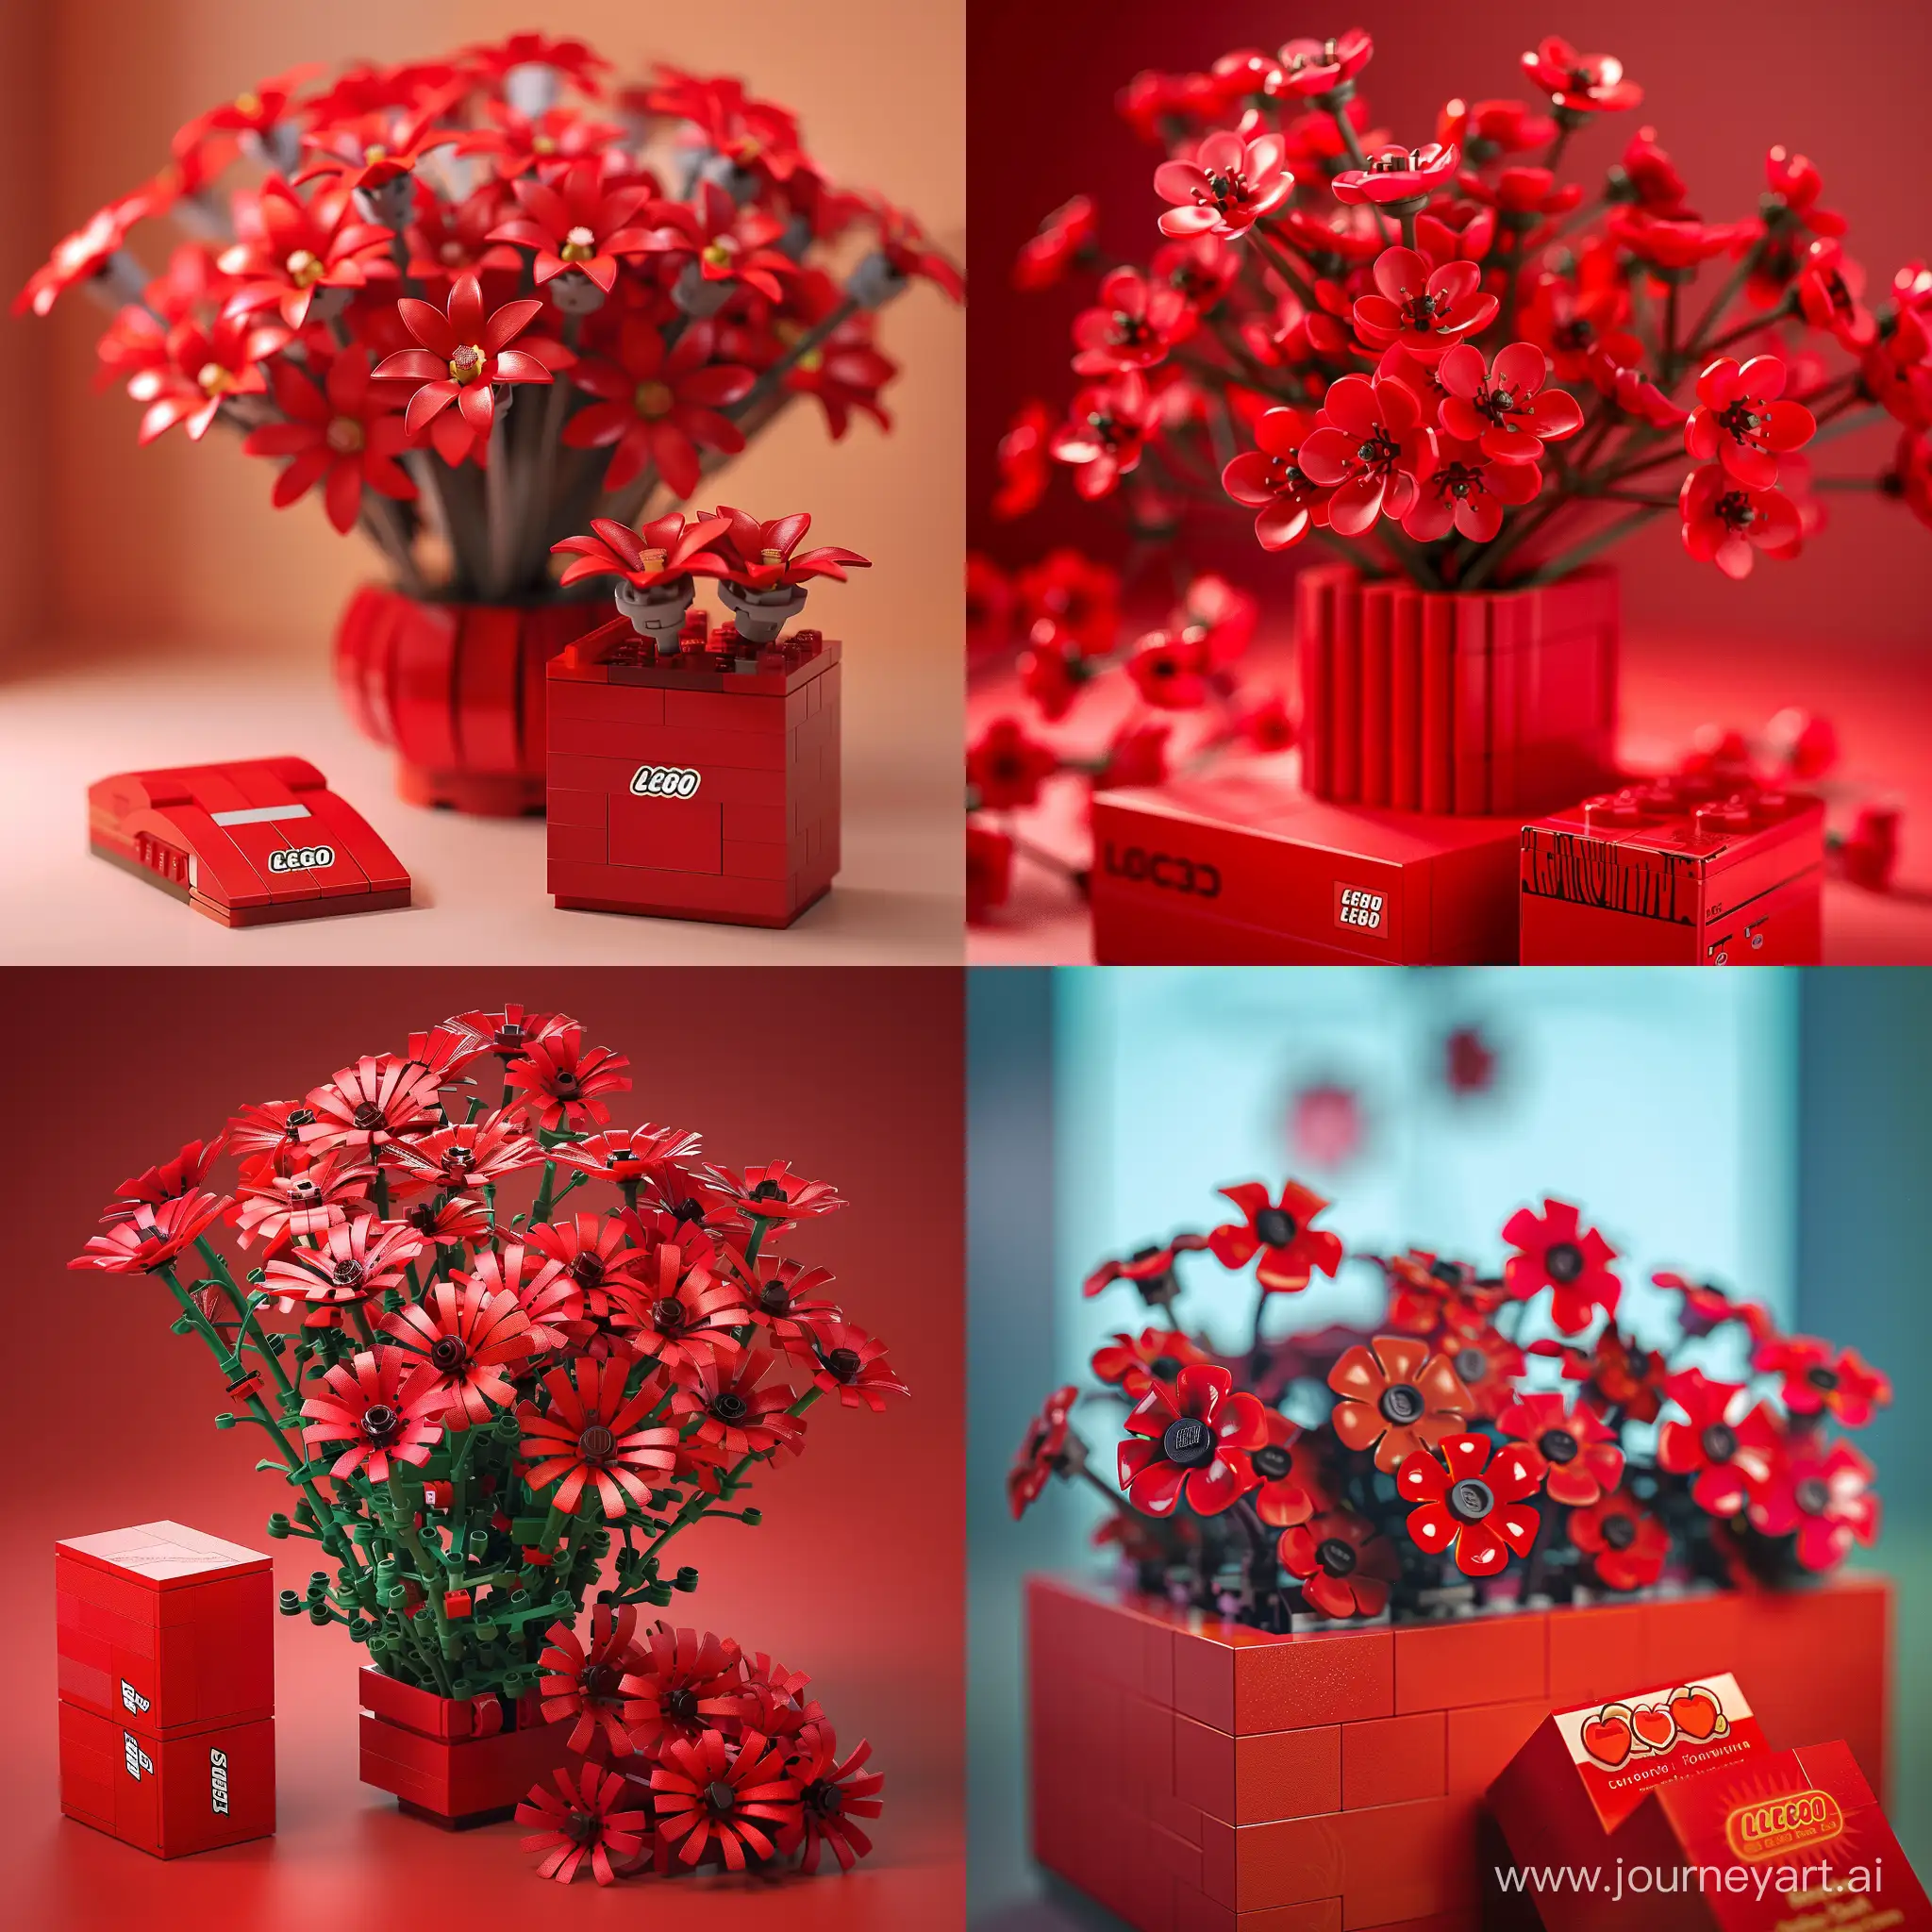 Vivid-Red-LEGO-Flowers-in-a-3D-Landscape-with-Box-Packaging